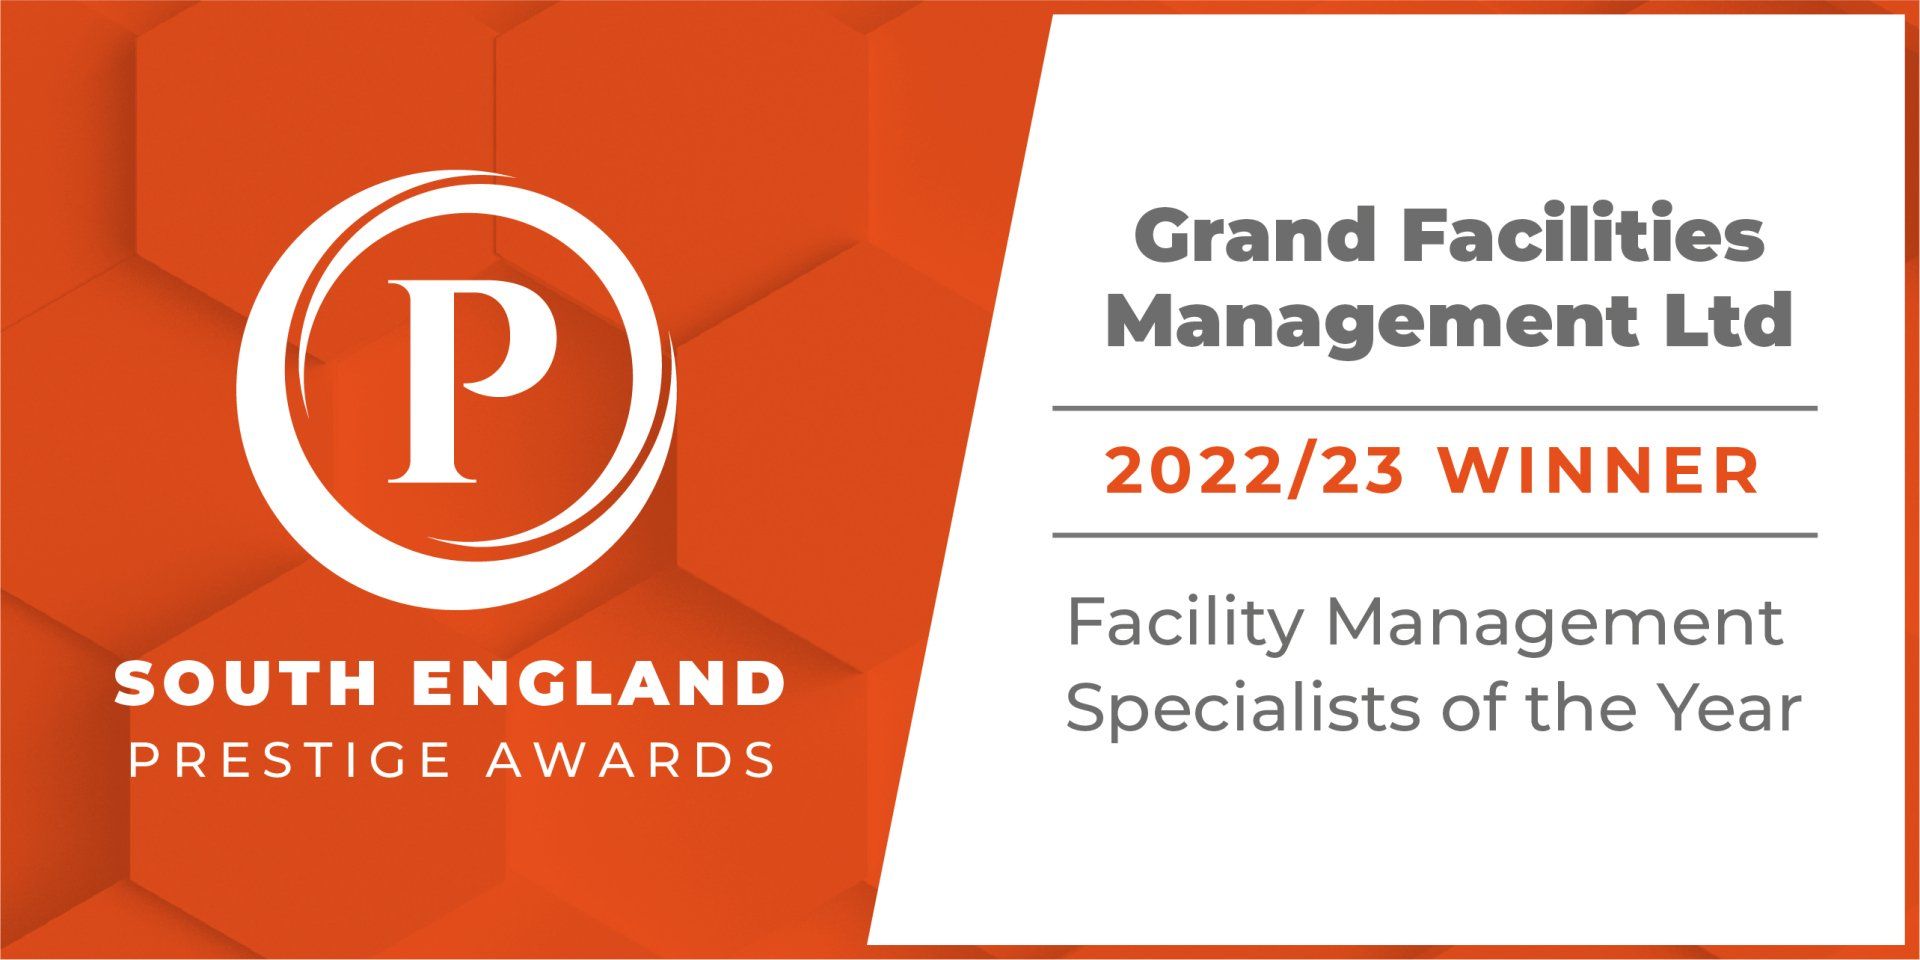 Grand Facilities Management 2022/23 winner facility management specialists